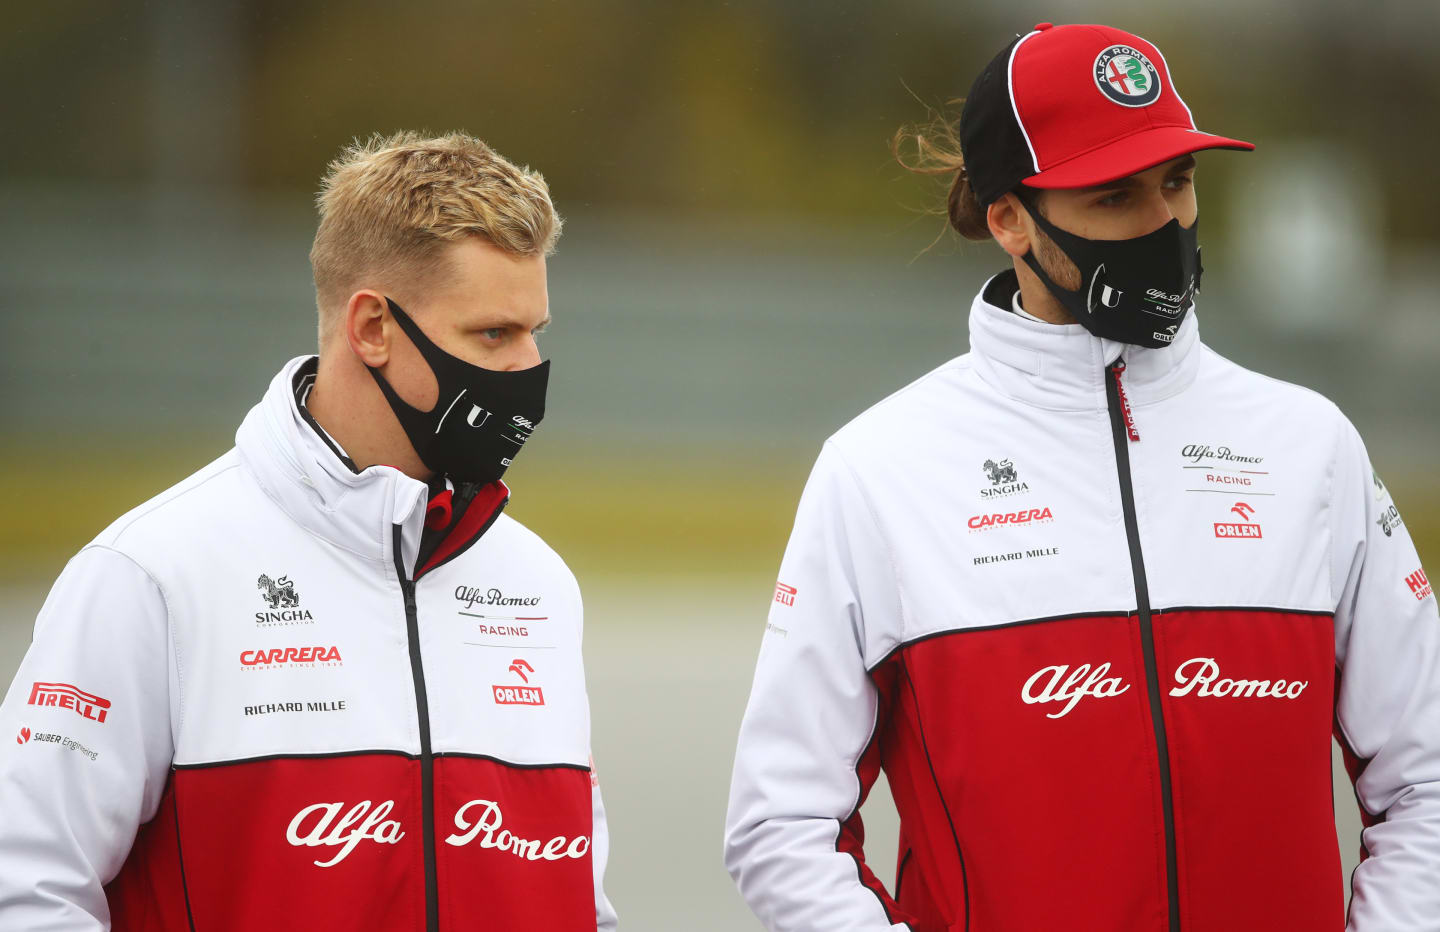 NUERBURG, GERMANY - OCTOBER 08: Mick Schumacher of Germany and Alfa Romeo Racing talks with Antonio Giovinazzi of Italy and Alfa Romeo Racing on a track walk during previews ahead of the F1 Eifel Grand Prix at Nuerburgring on October 08, 2020 in Nuerburg, Germany. (Photo by Bryn Lennon/Getty Images)